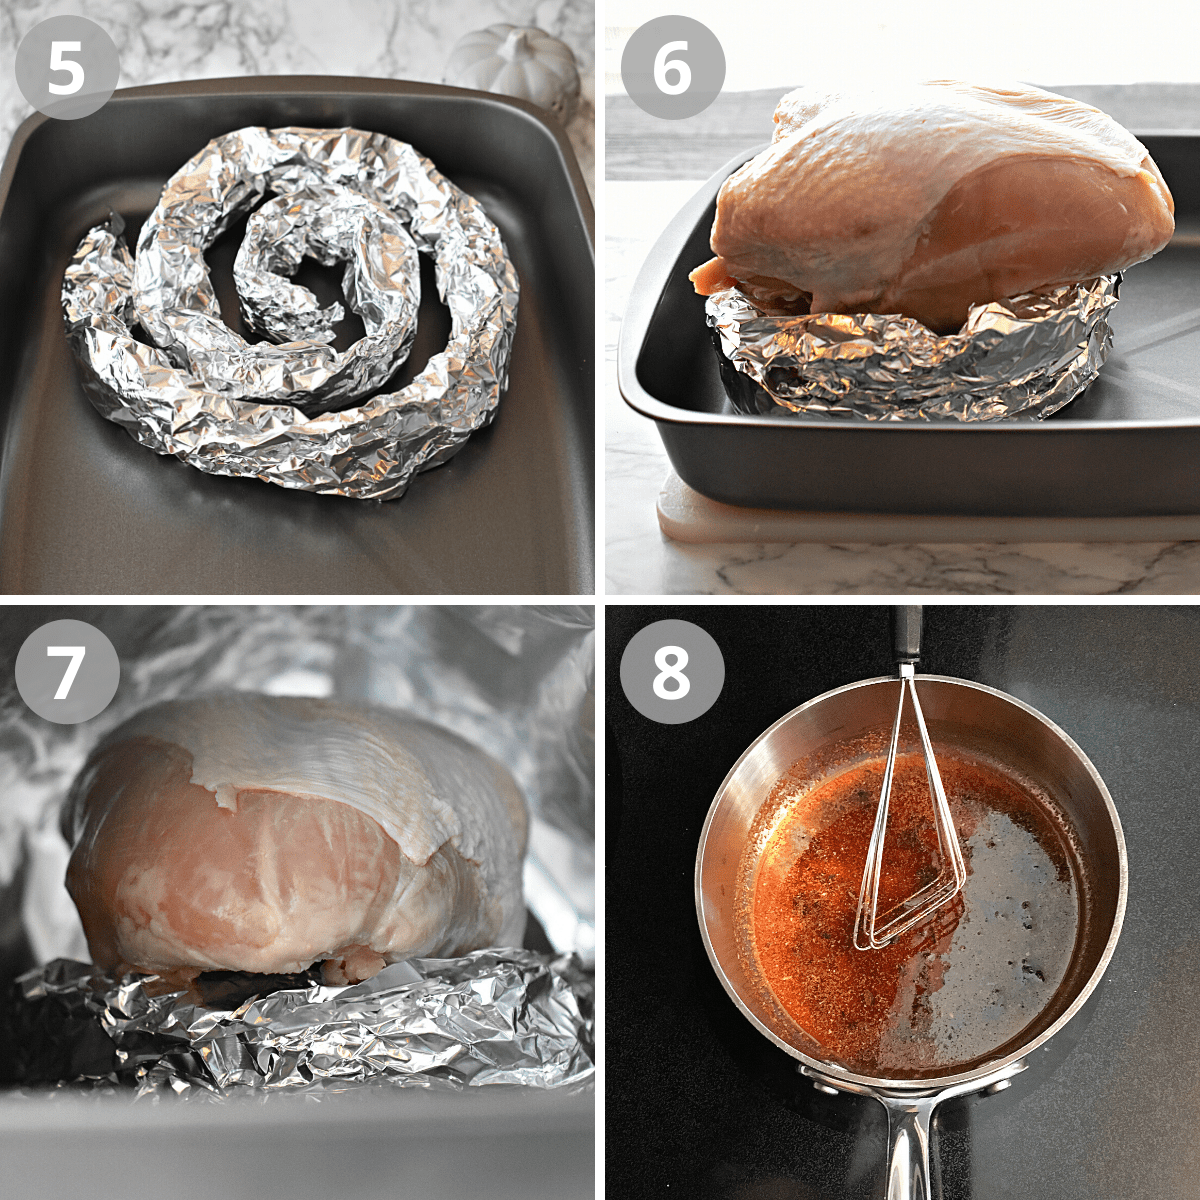 Four images showing the steps to prepare a turkey breast for roasting.